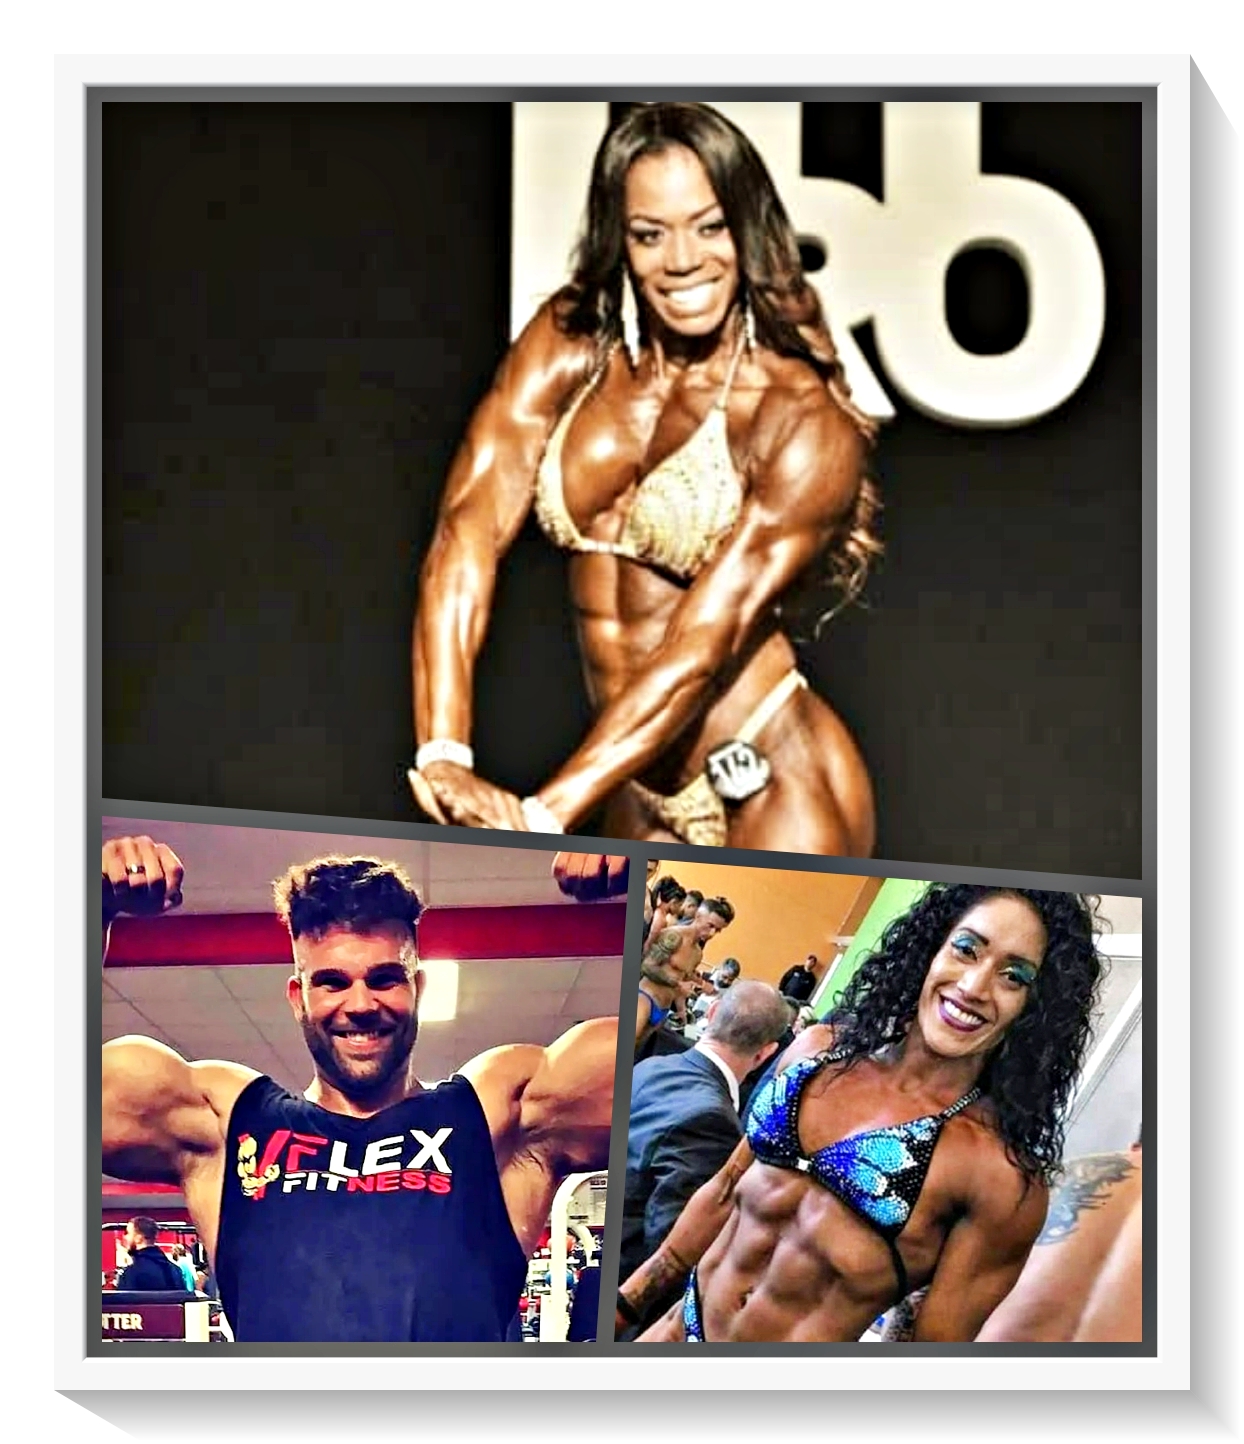 Bodybuilders collapsing and dying suddenly – more suspicious high level athlete deaths